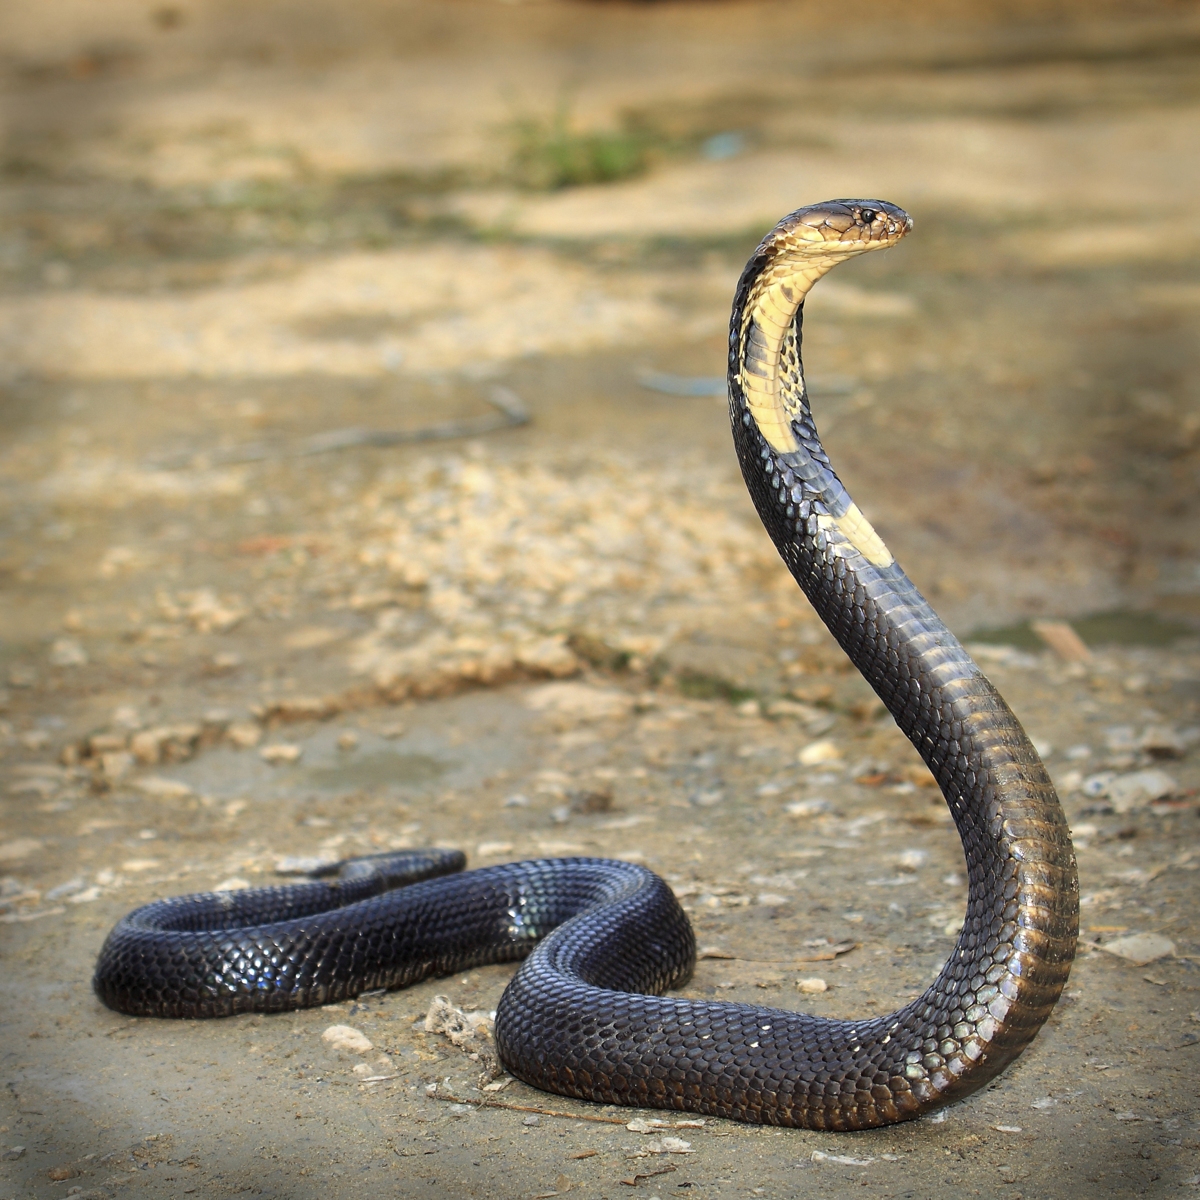 Can You Match These Animals With Their Natural Food Source? King cobra